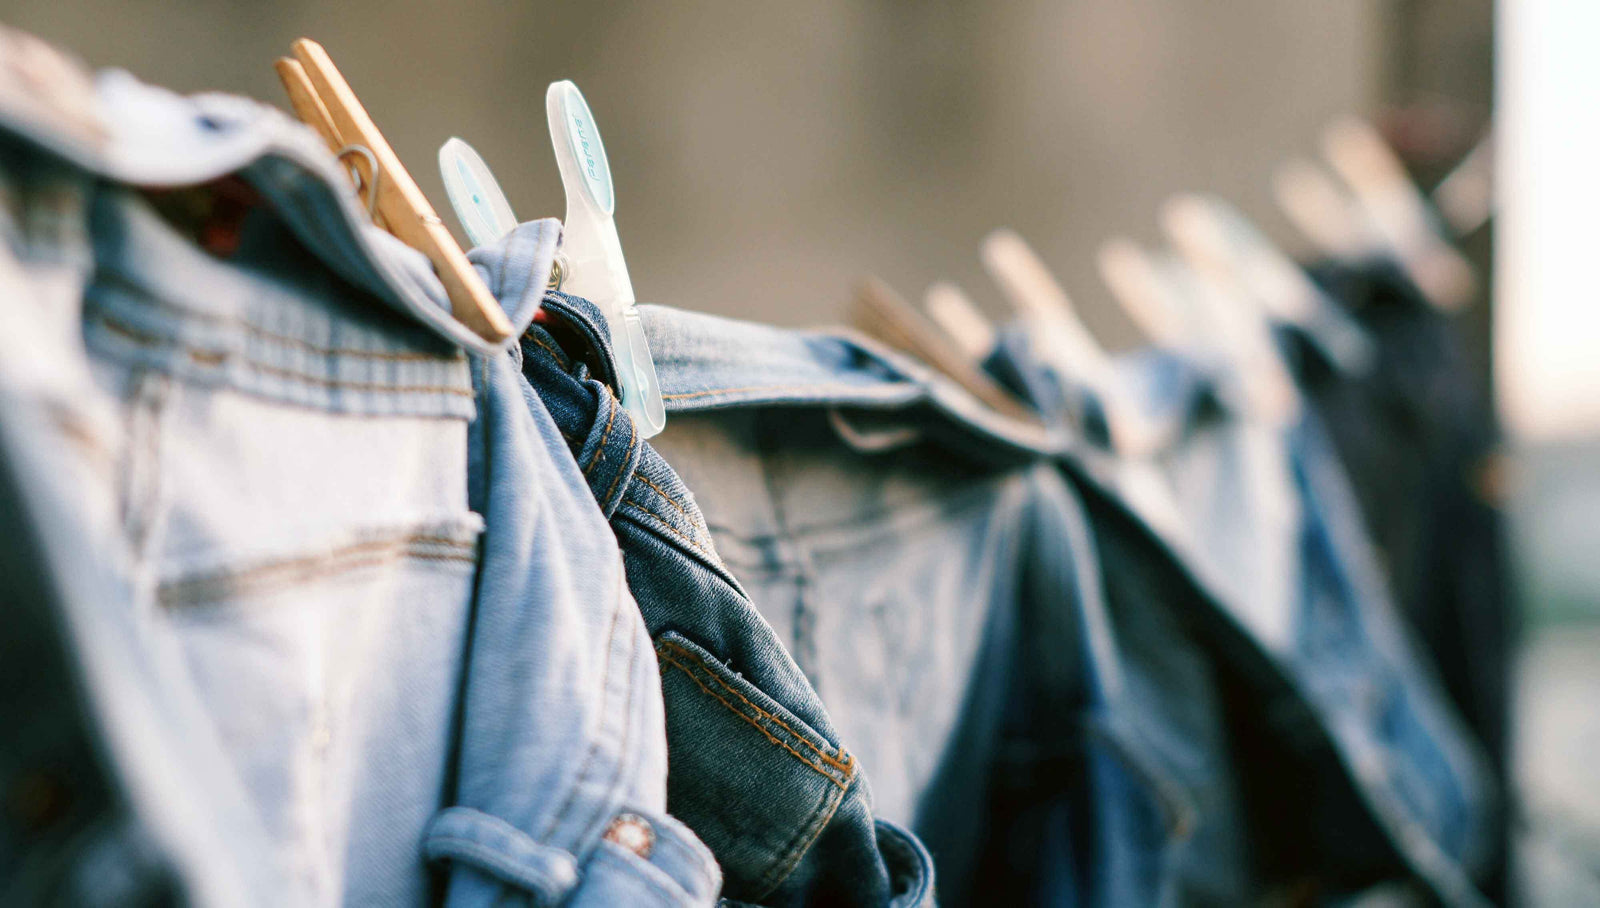 Tips to Extend the Life of Your Clothes